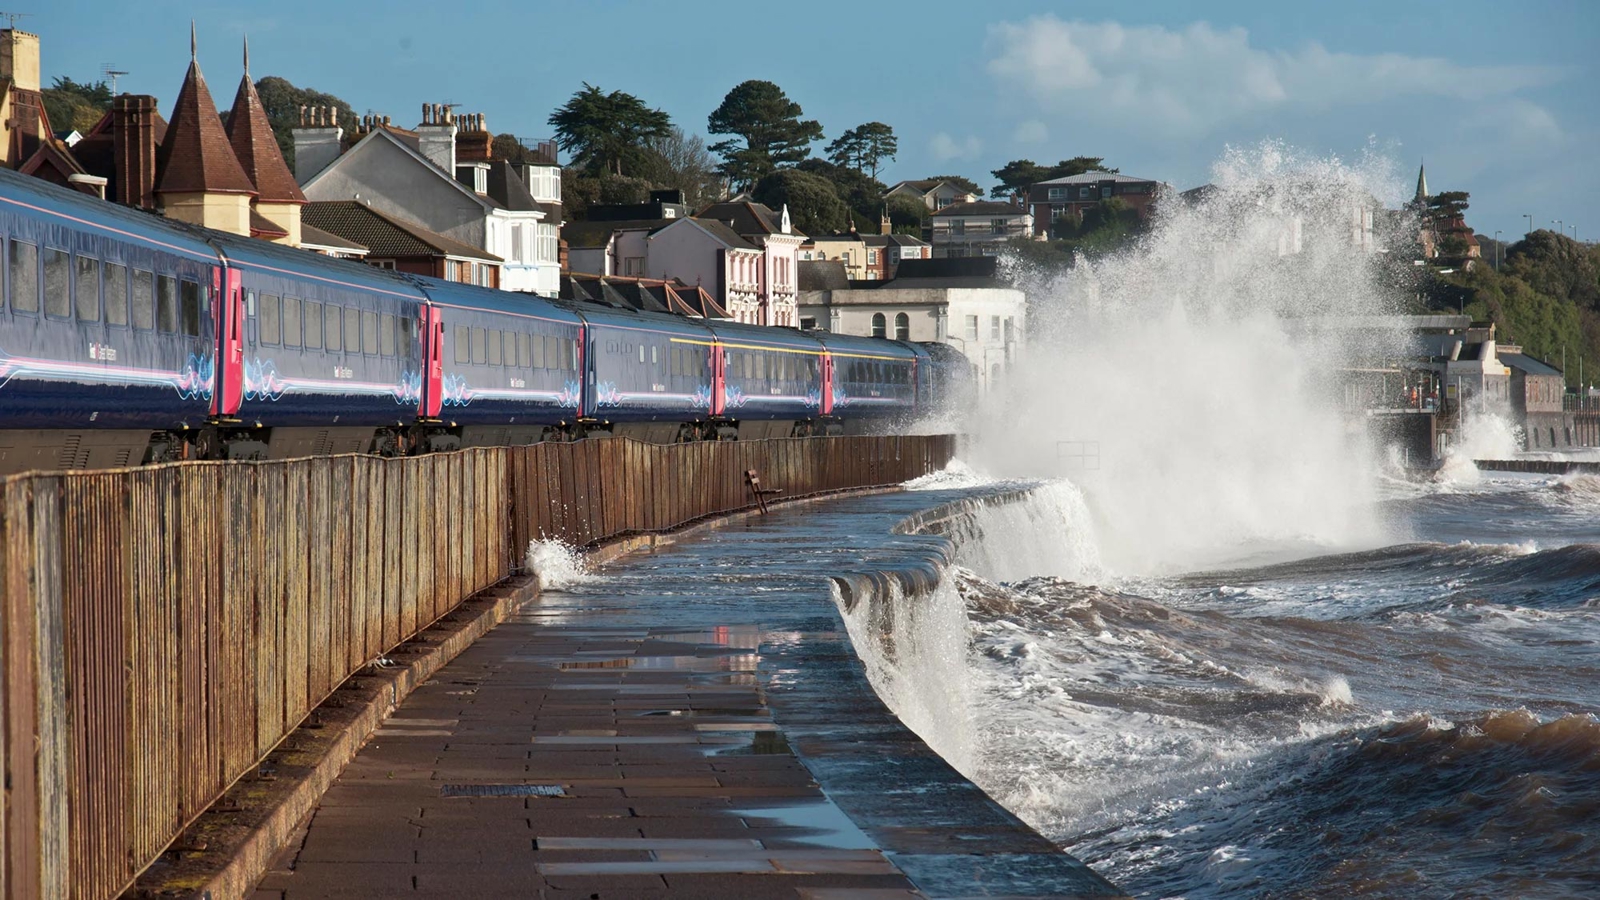 Train running along the coastline with waves throwing up water close to the track